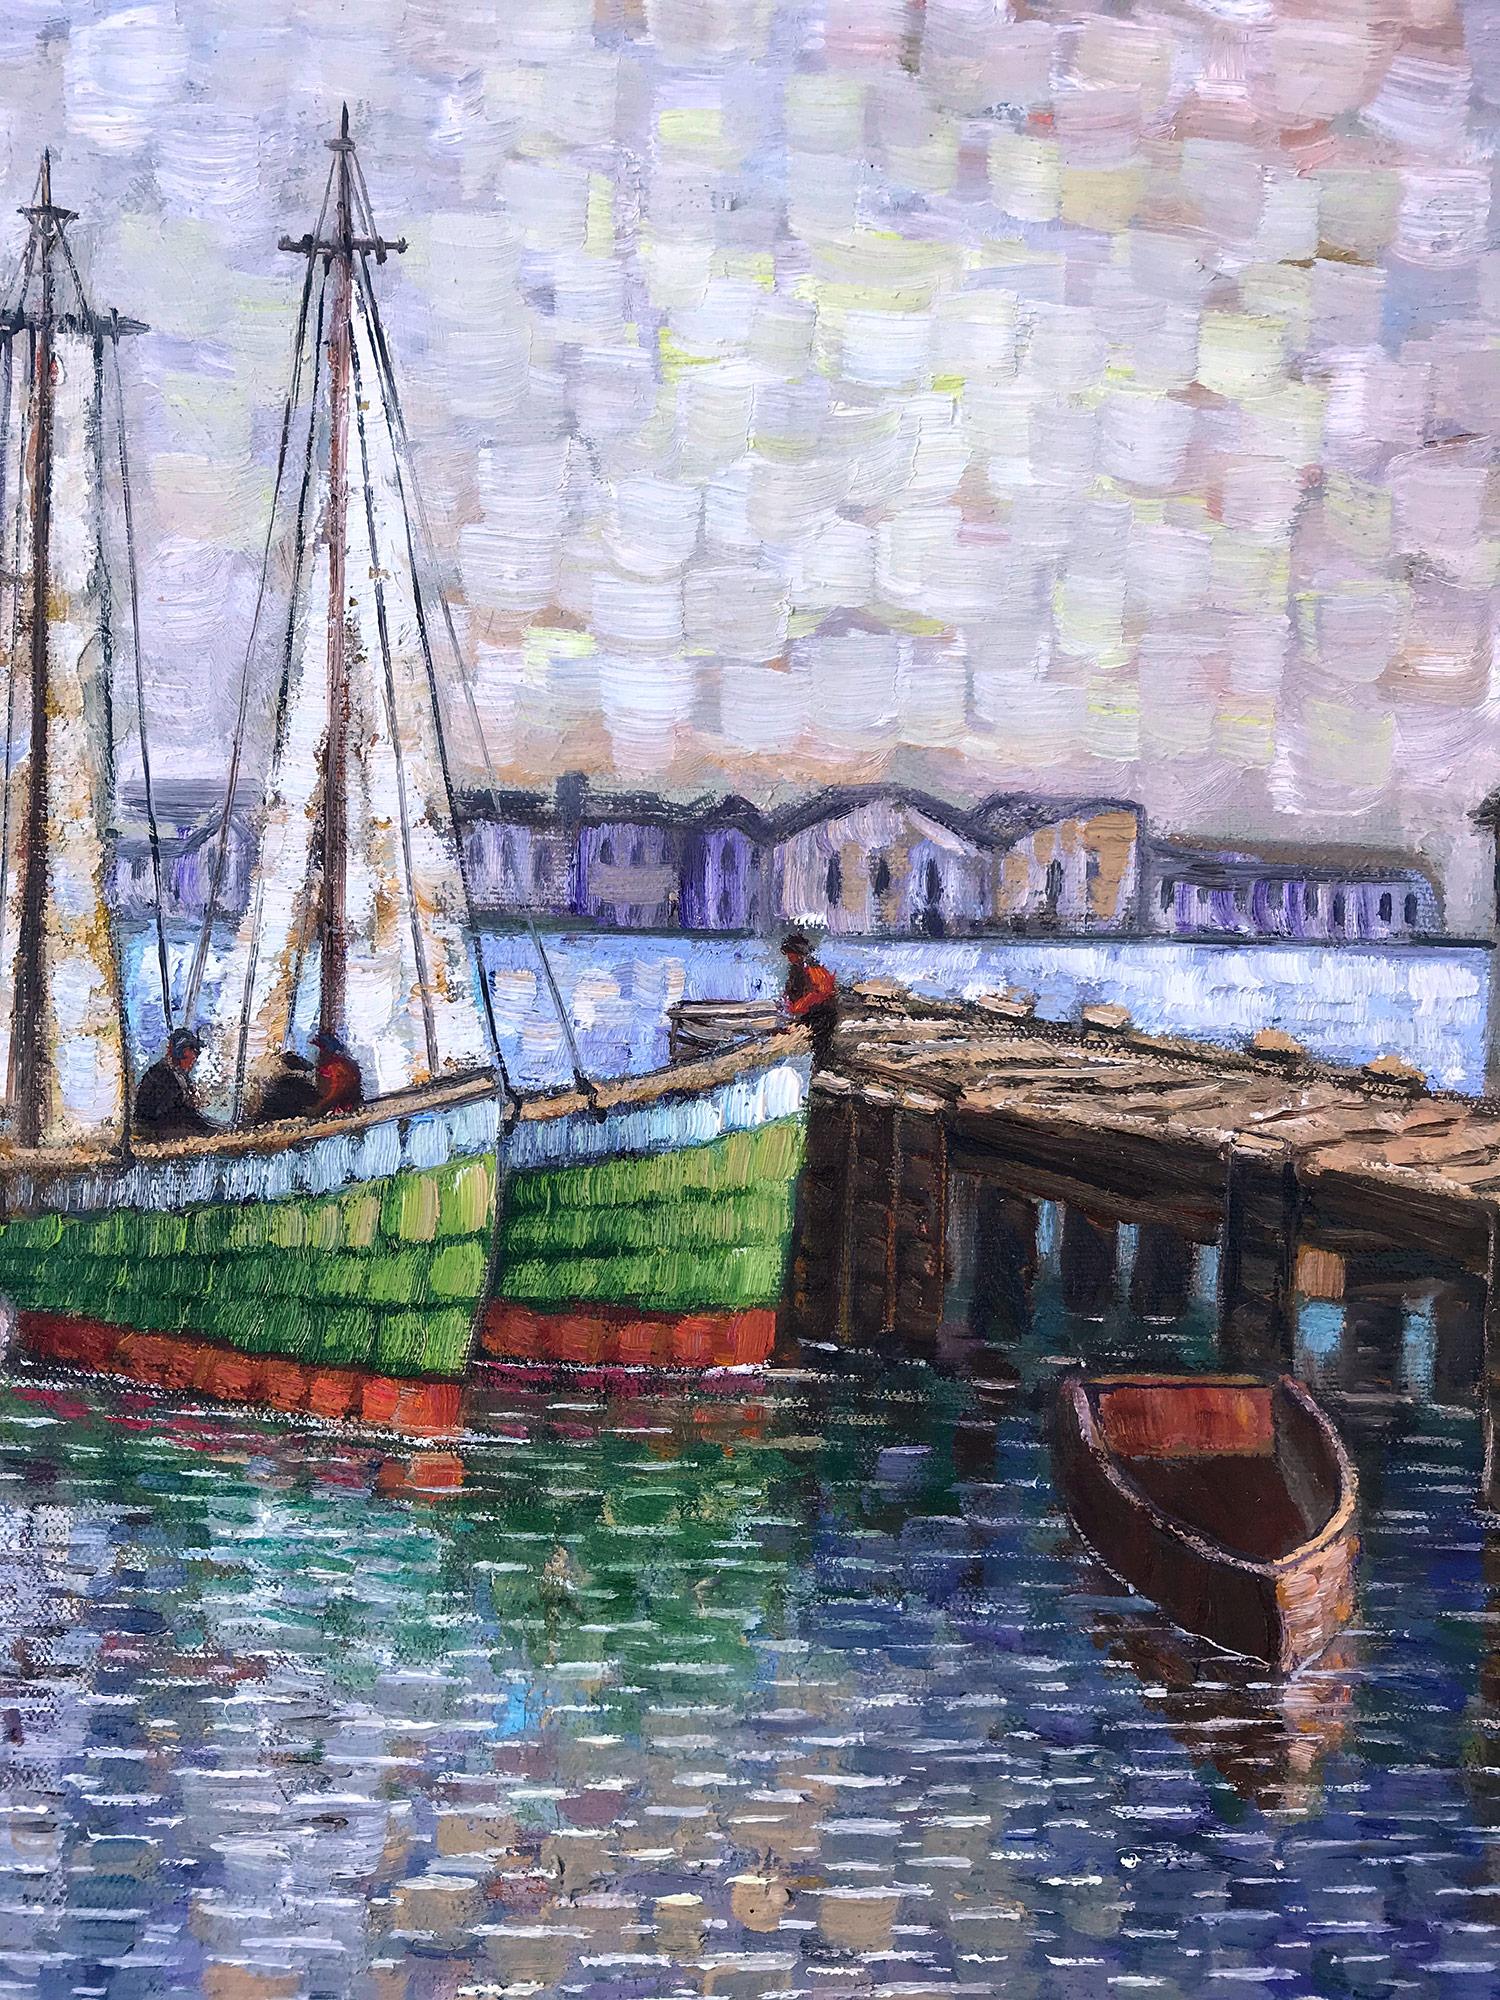 A stunning depiction of boats docked in a Cape Cod harbor. Nemethy uses a bold impressionistic technique with thick use of paint and wonderful impressions. With unique colors from the North East, we can feel the atmosphere effortlessly. With joyful